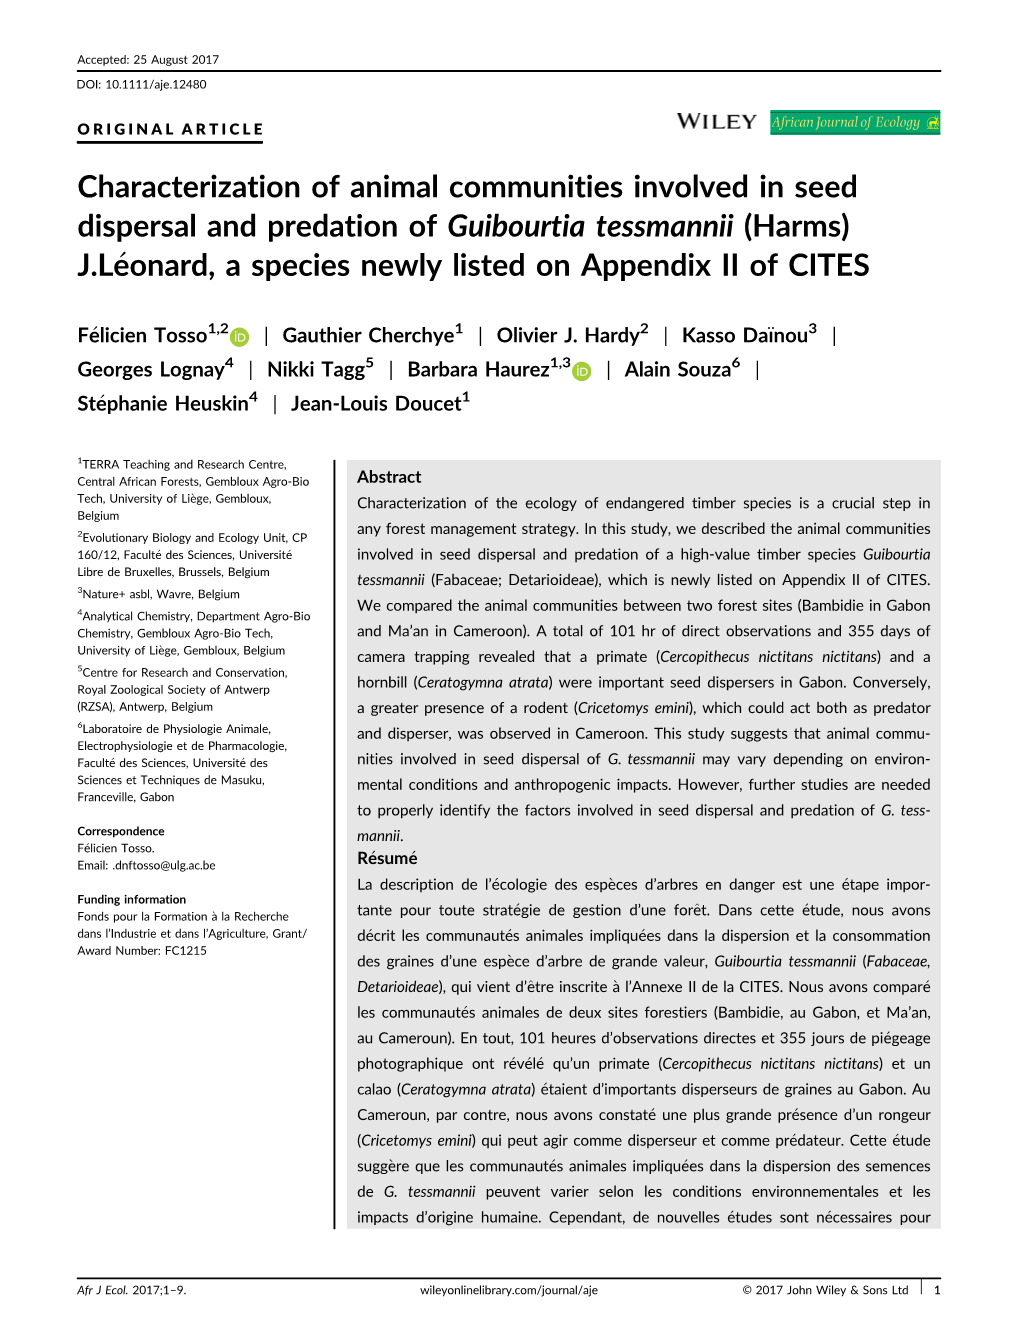 Characterization of Animal Communities Involved in Seed